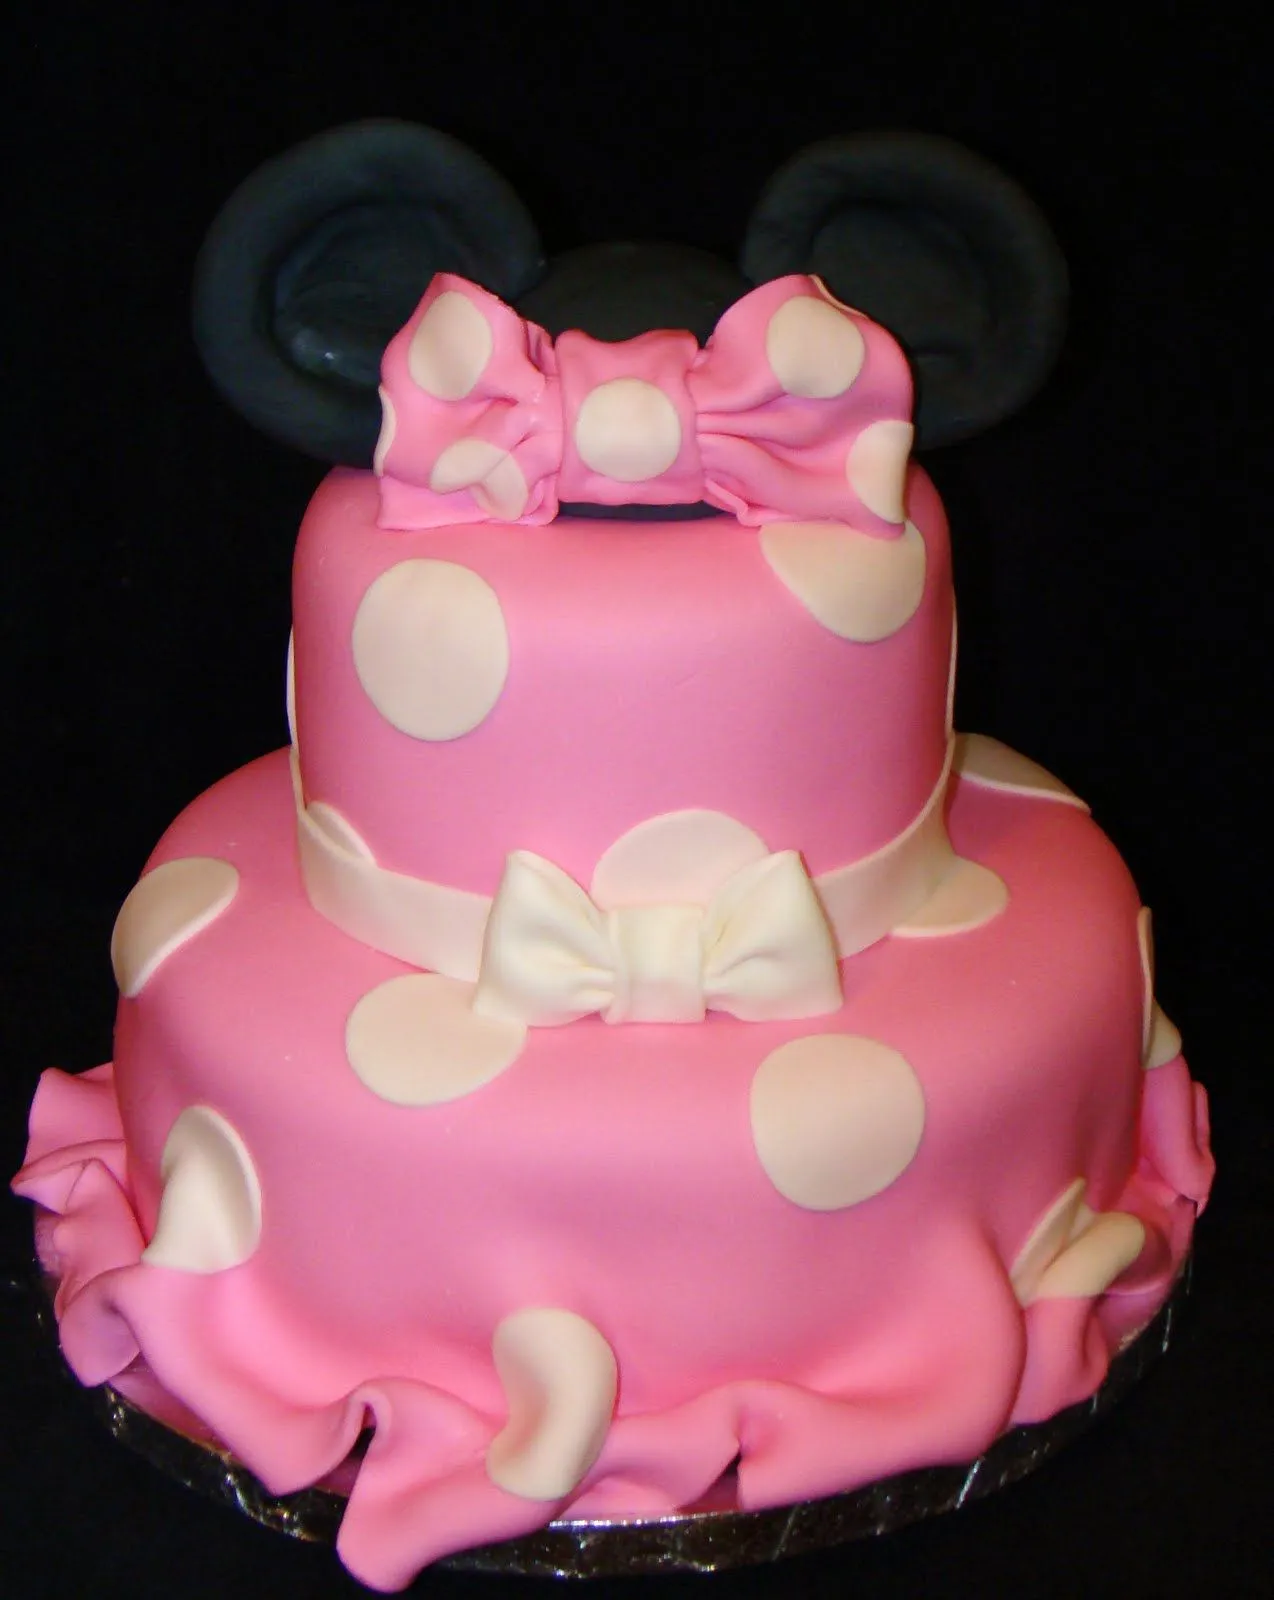 Layers of Love: Minnie Mouse dress cake